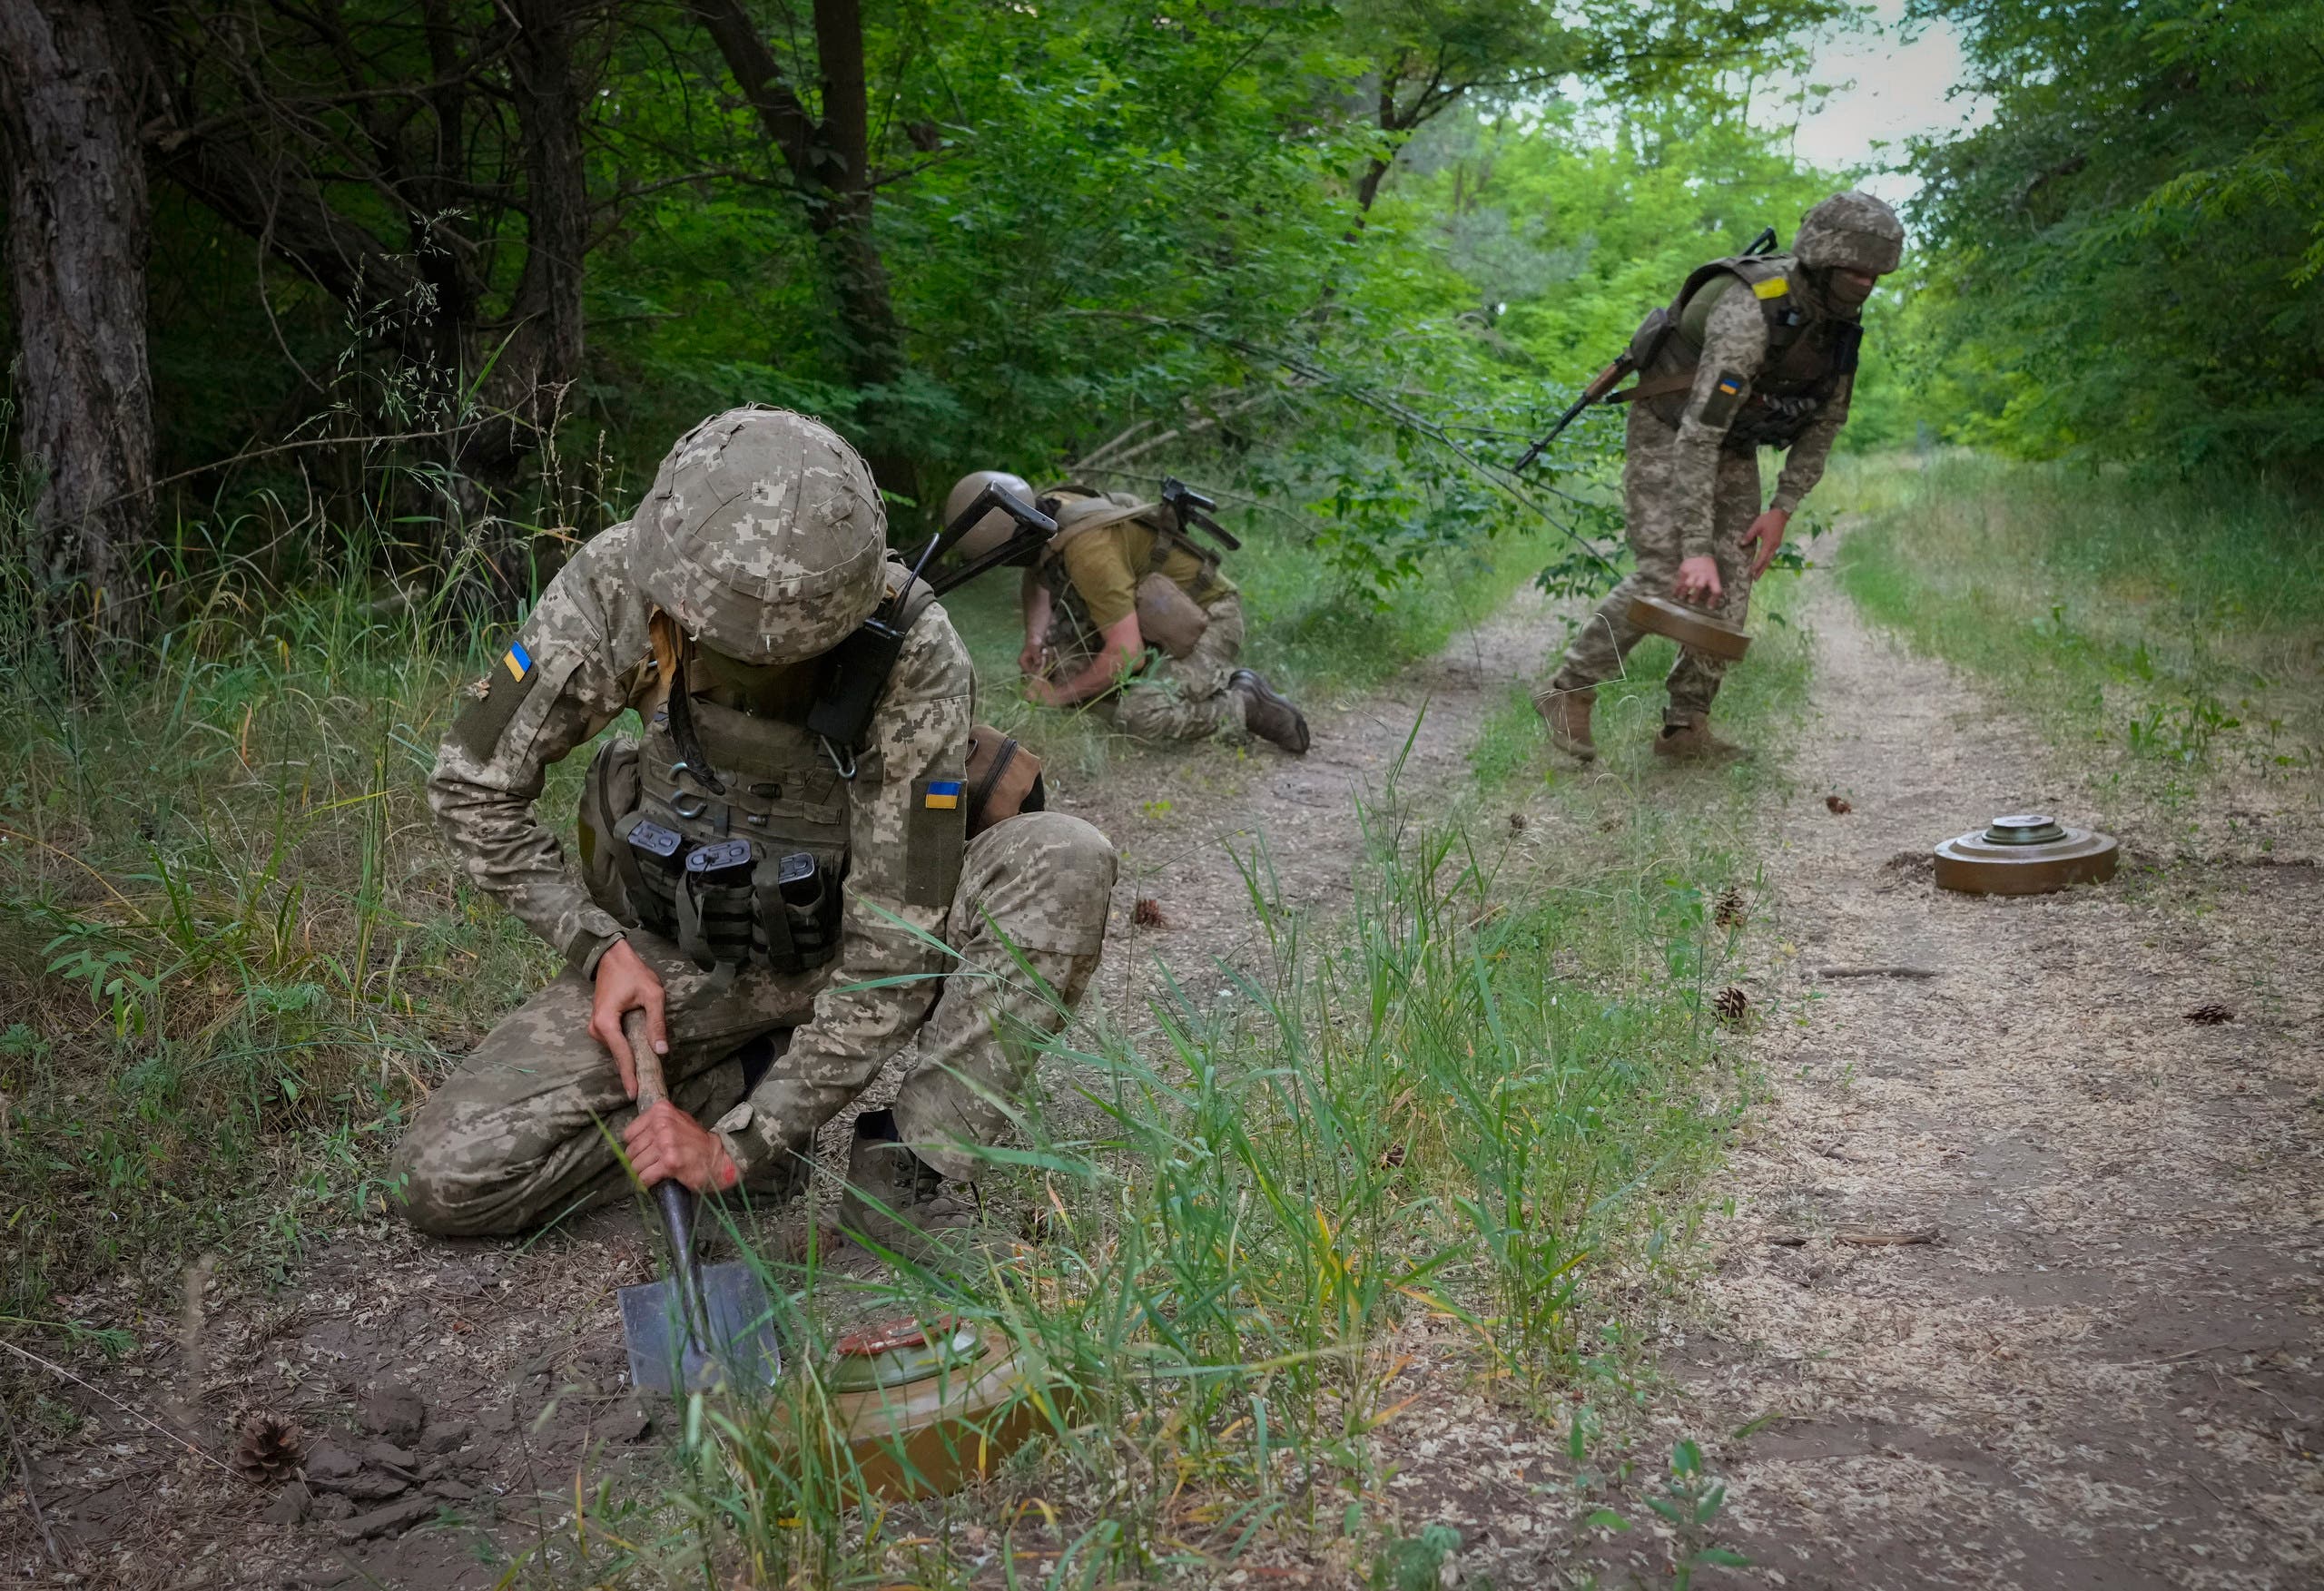 Ukrainian forces lay mines (Tuesday - The Associated Press)